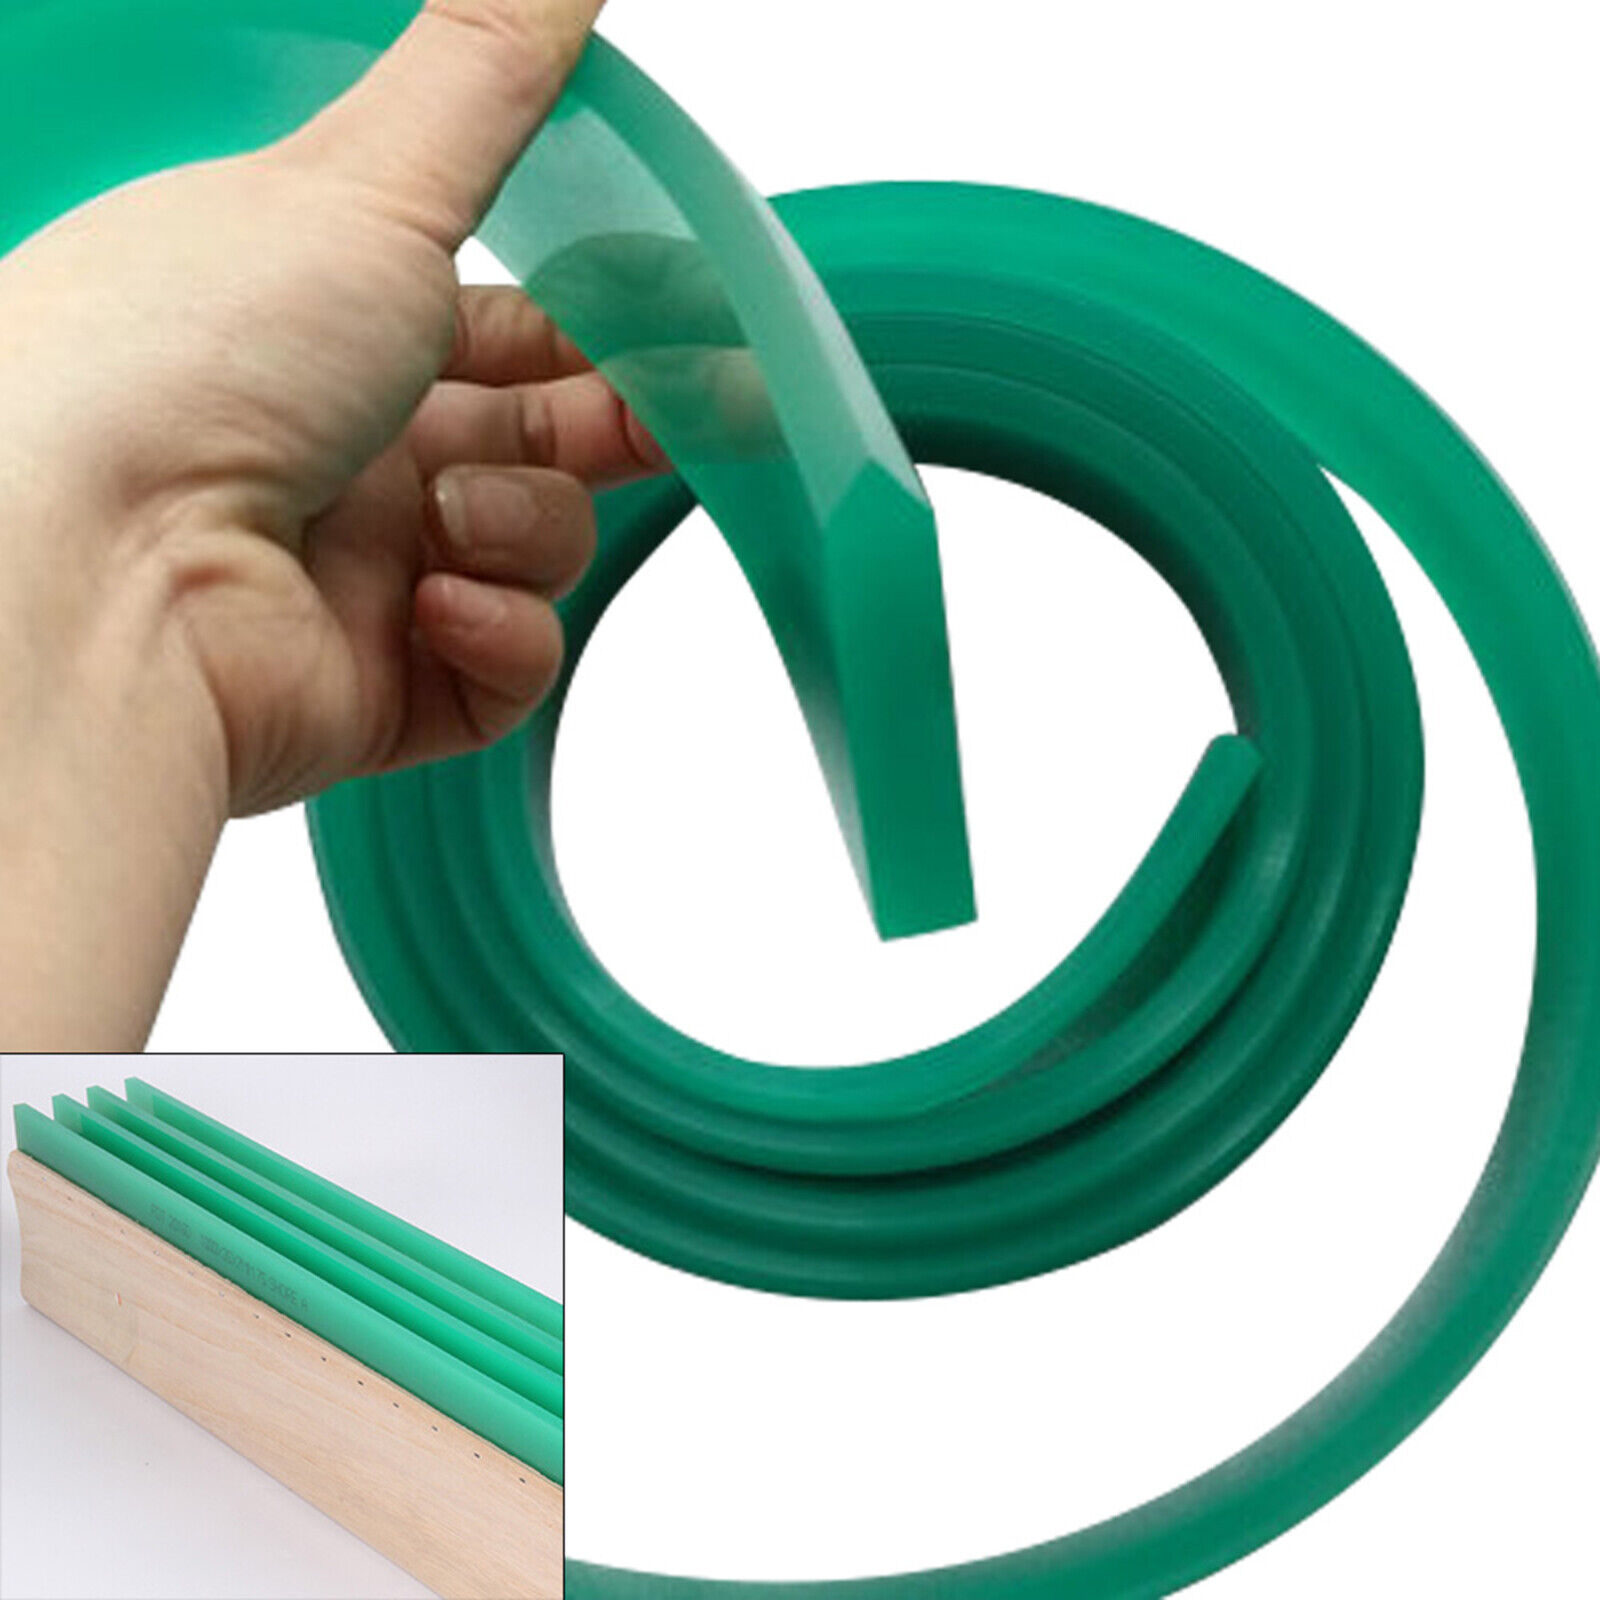 80 DURO 6FT 72" Silk Screen Printing Squeegee Blade Polyurethane Rubber Green Unbranded Does Not Apply